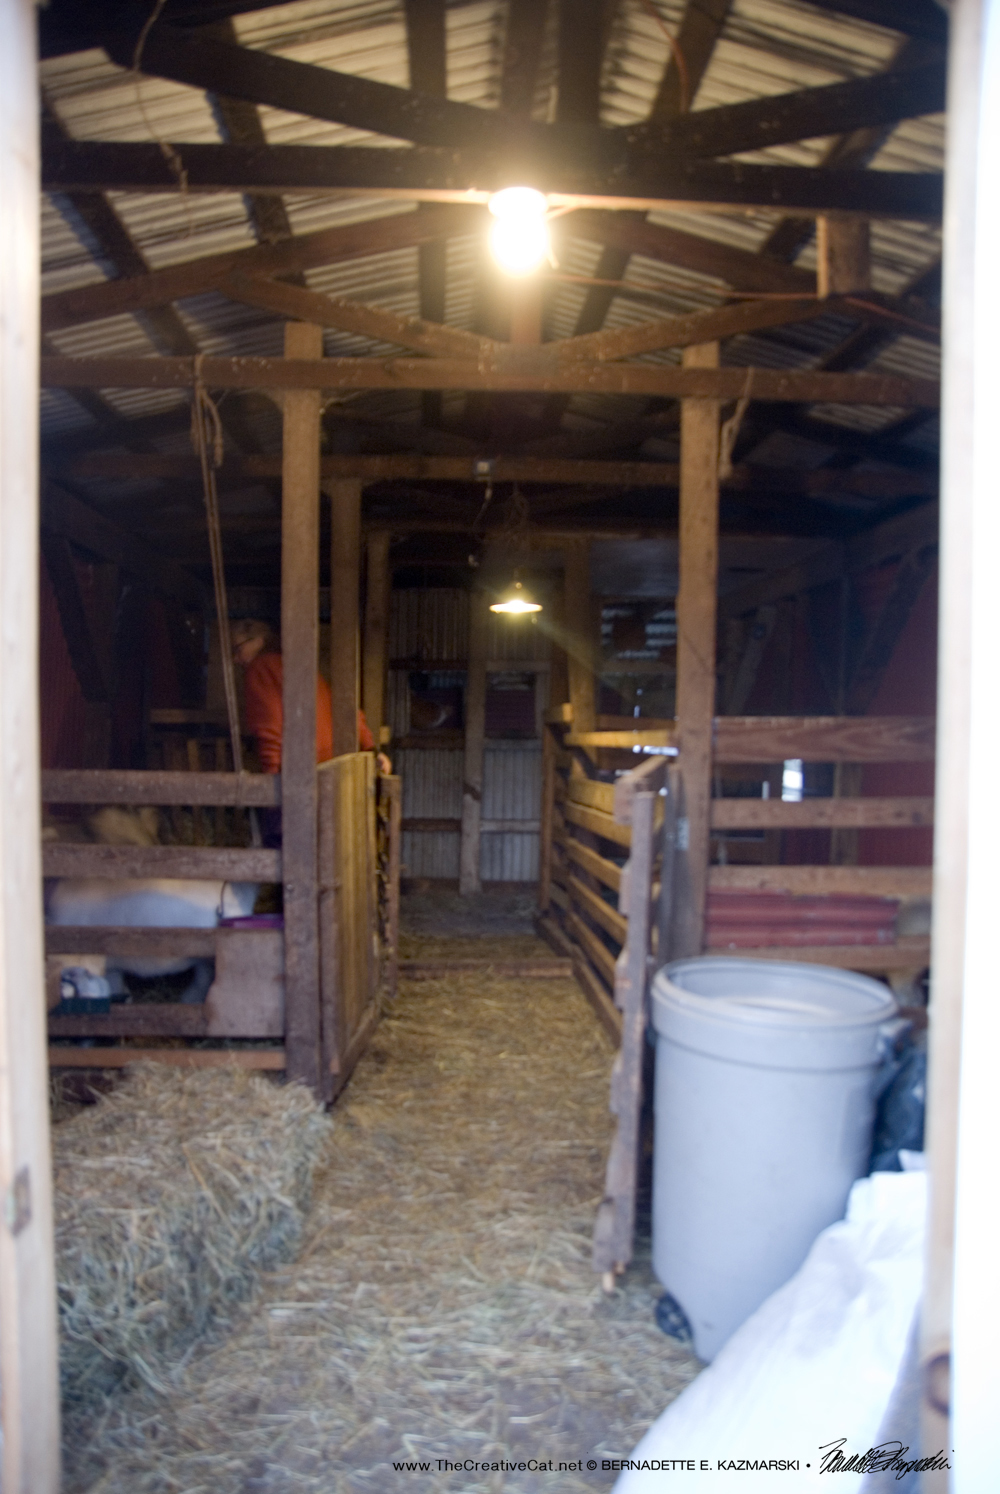 The interior of the goat barn where the cats will eventually stay.